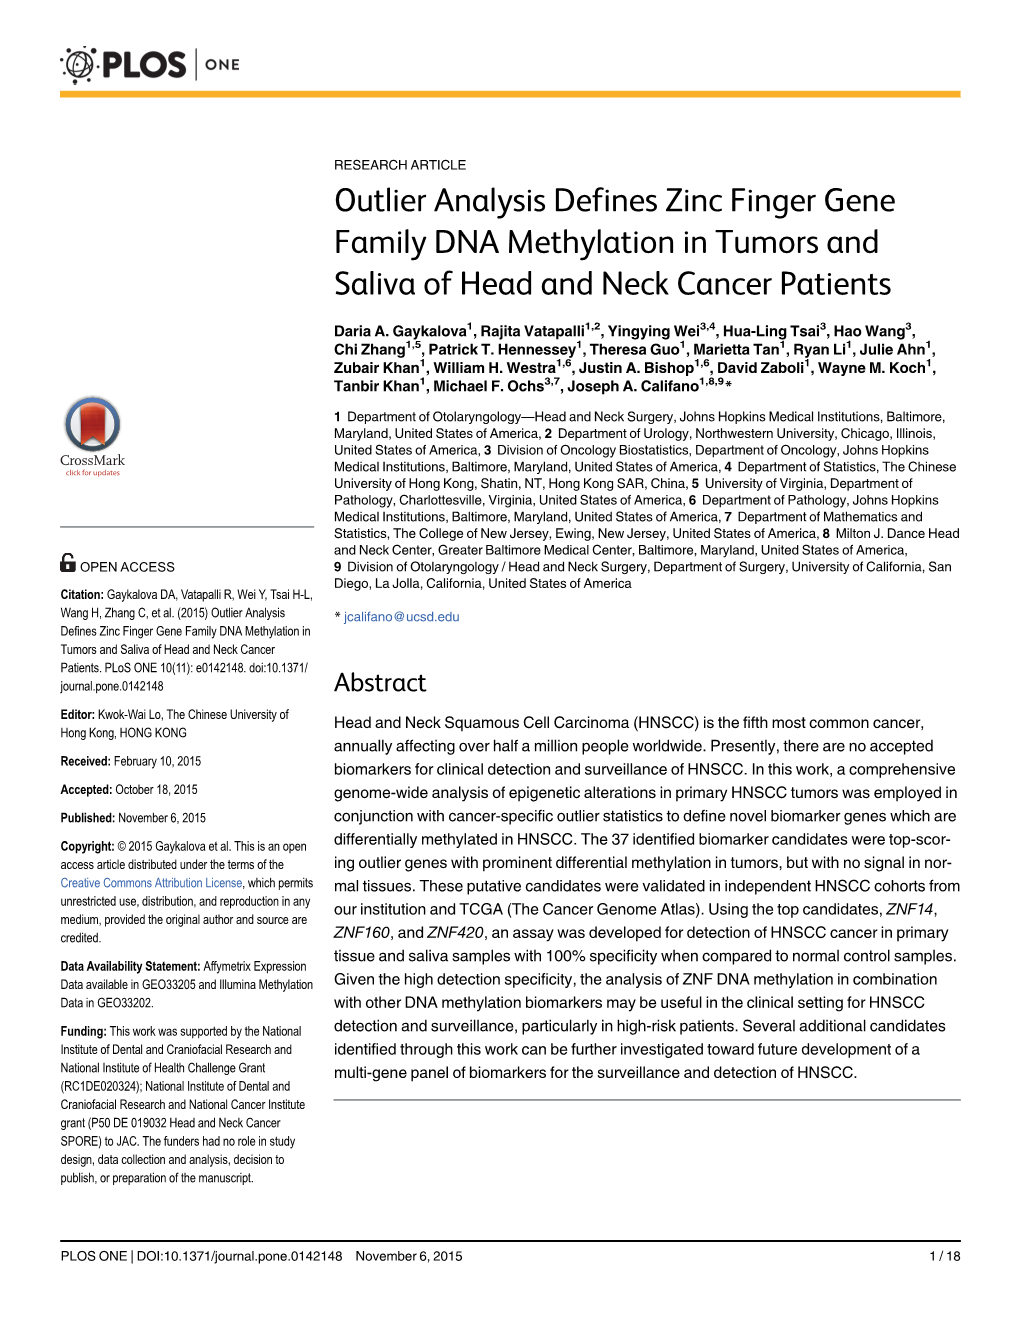 Outlier Analysis Defines Zinc Finger Gene Family DNA Methylation in Tumors and Saliva of Head and Neck Cancer Patients